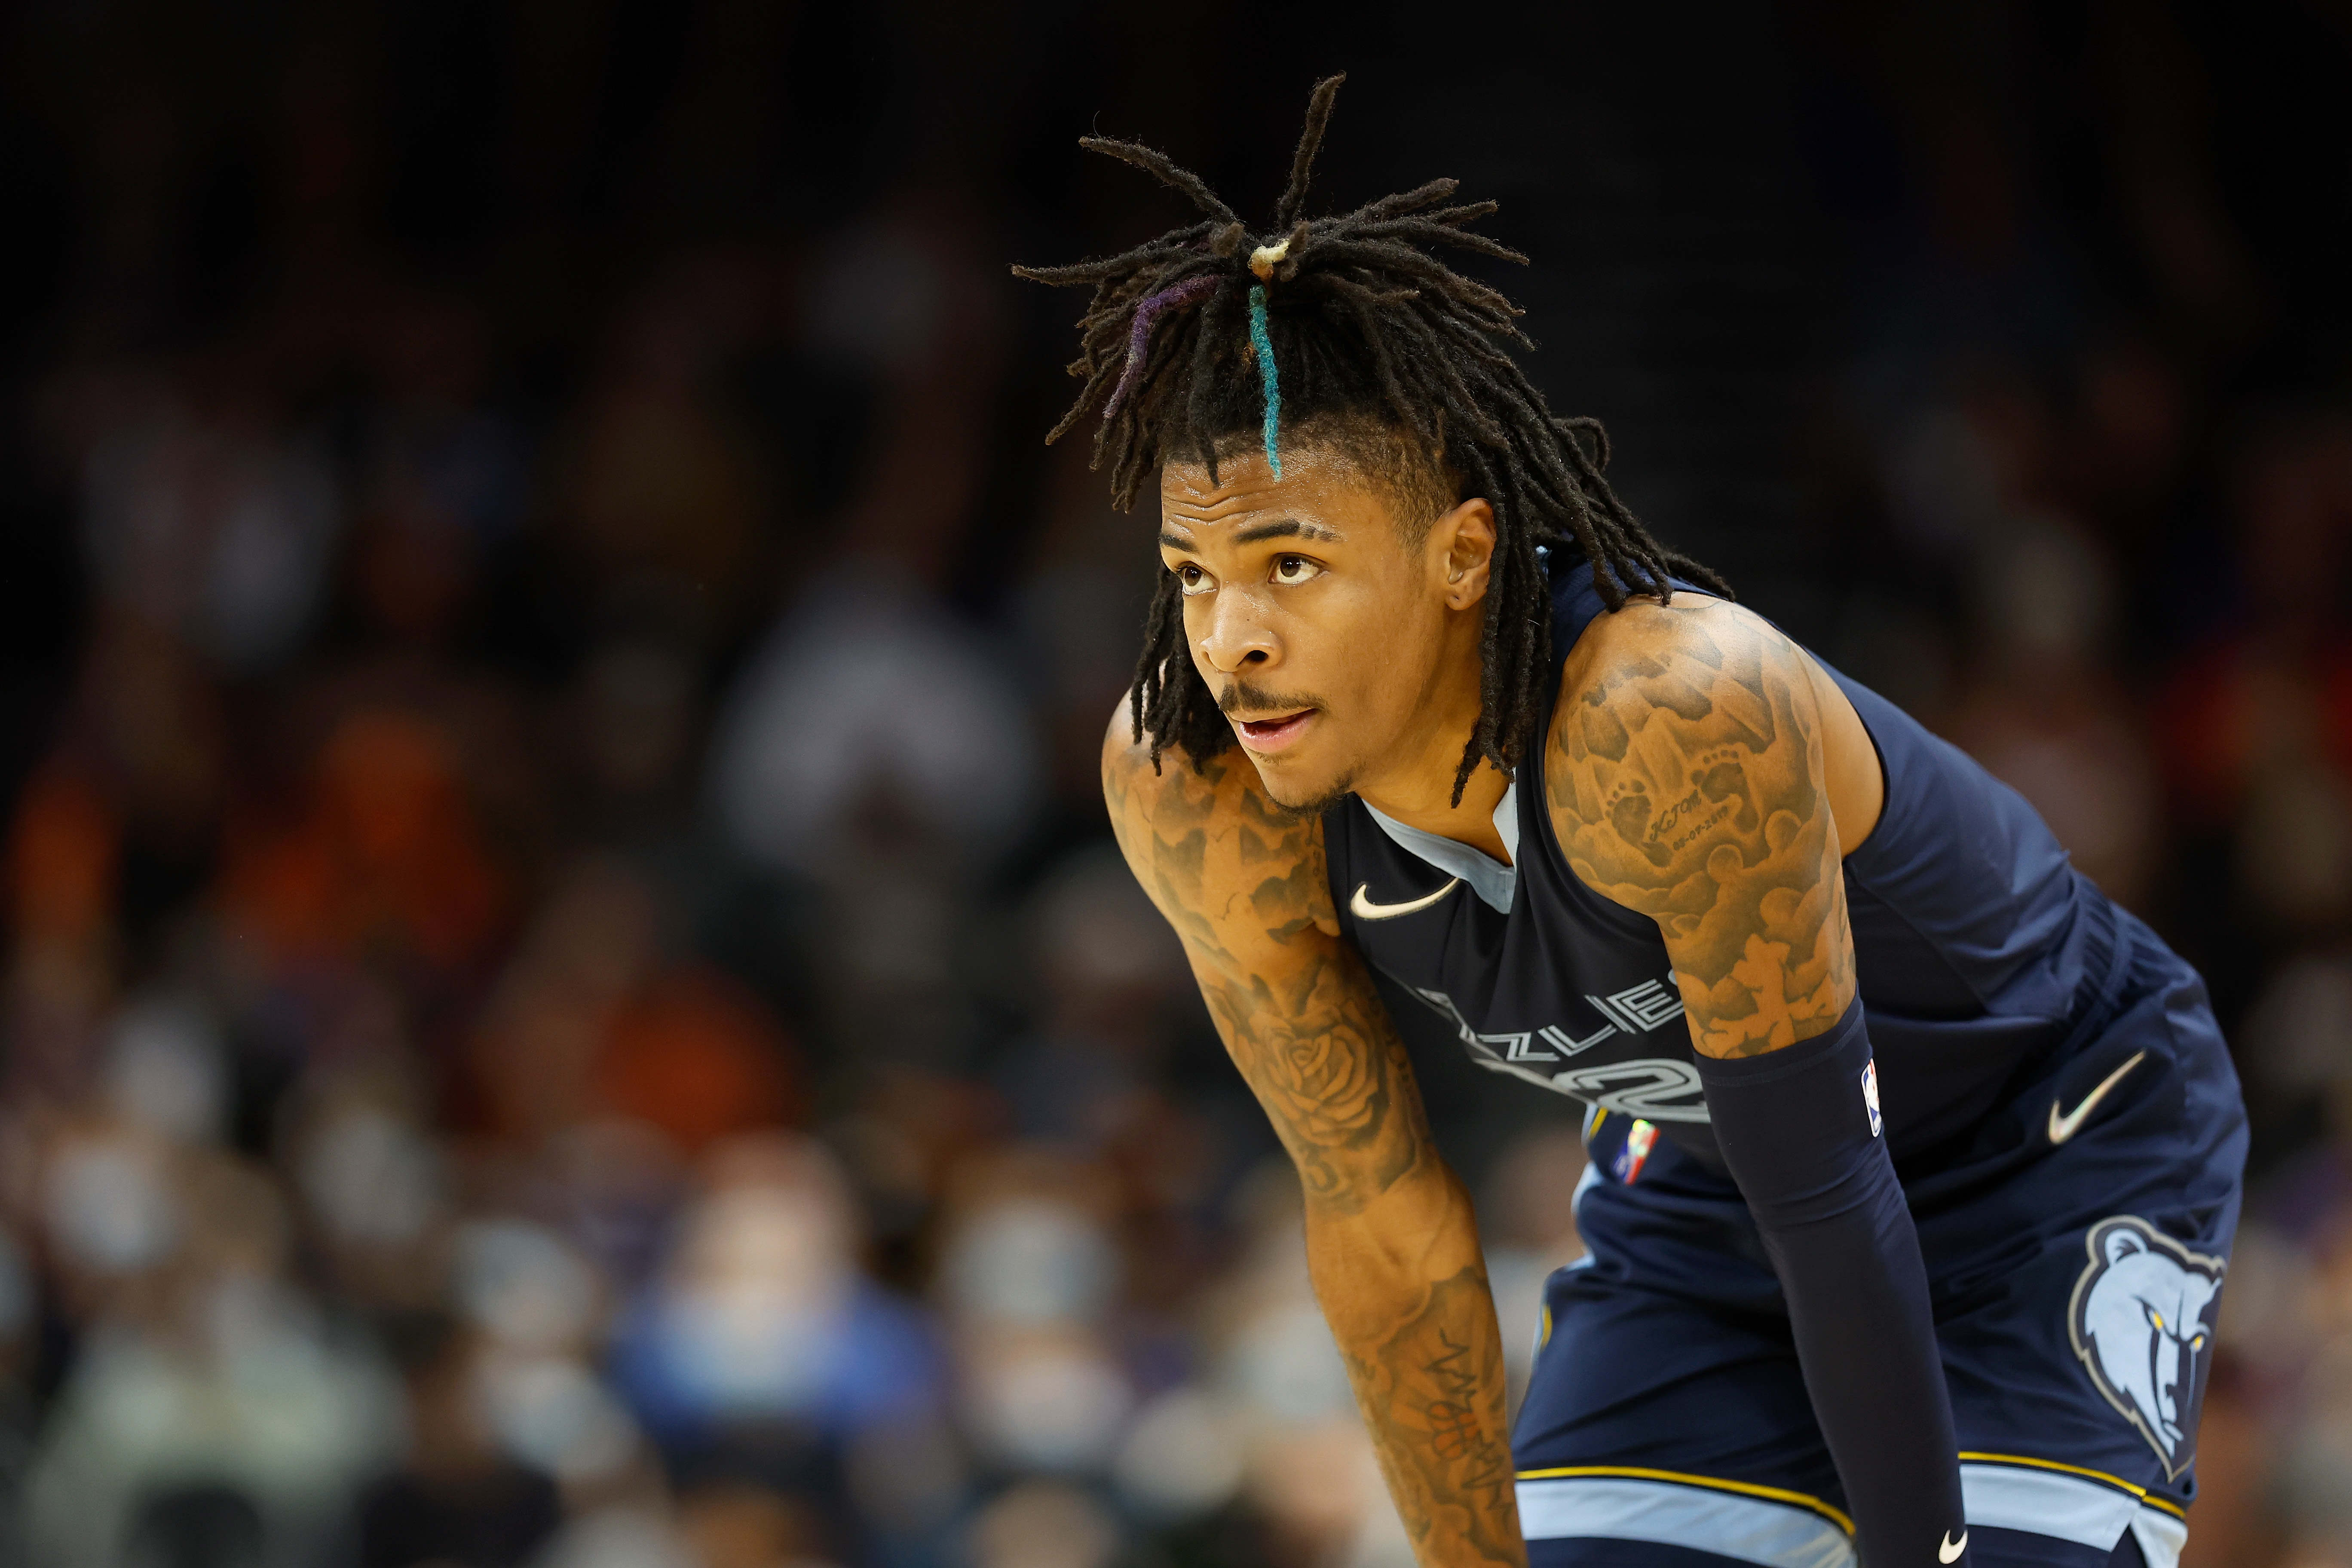 Memphis Grizzlies point guard Ja Morant looks on during a game against the Phoenix Suns